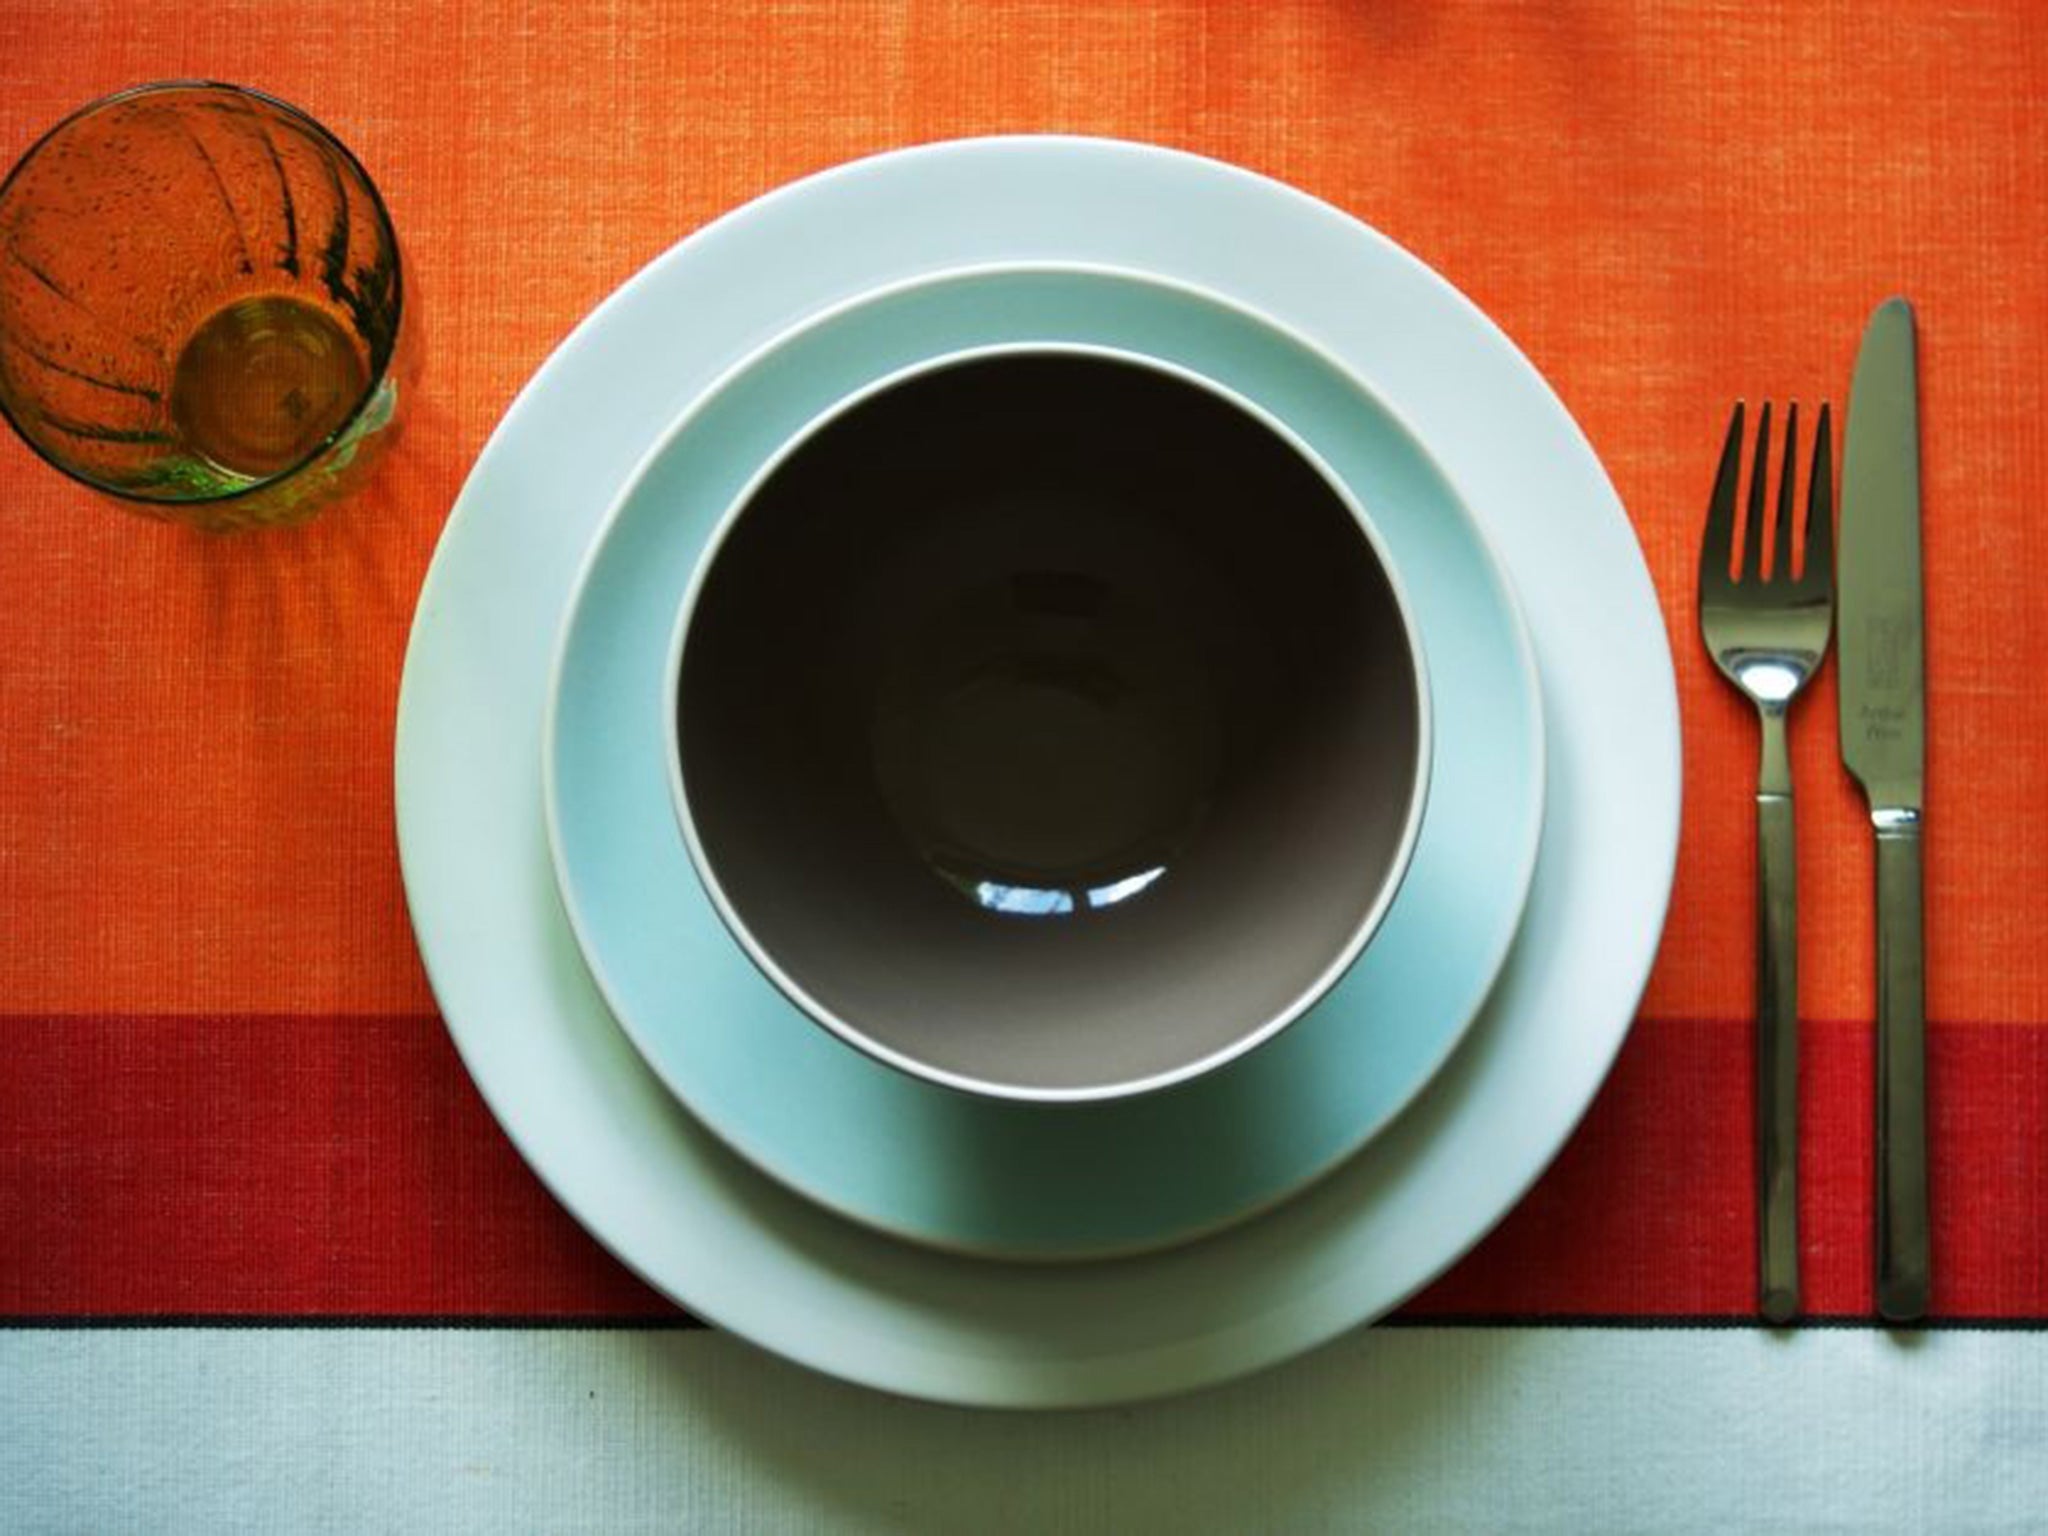 Habitat place mats with Homebase dinner plate, side and bowl in stunning neutral shades.